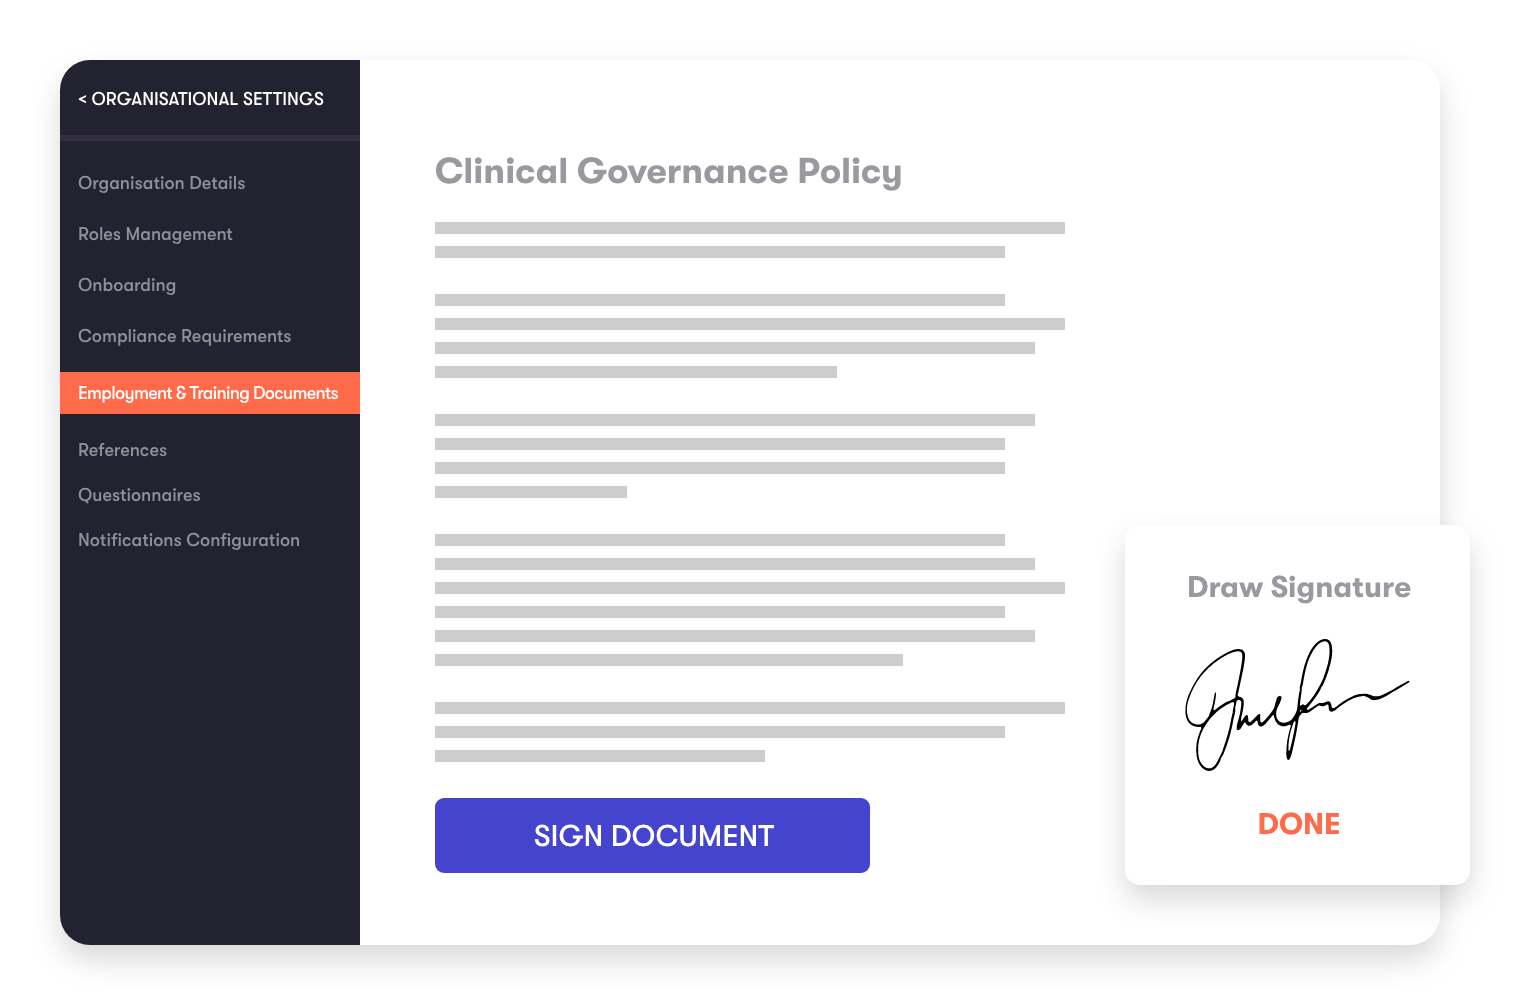 E-signatures and policy/document review